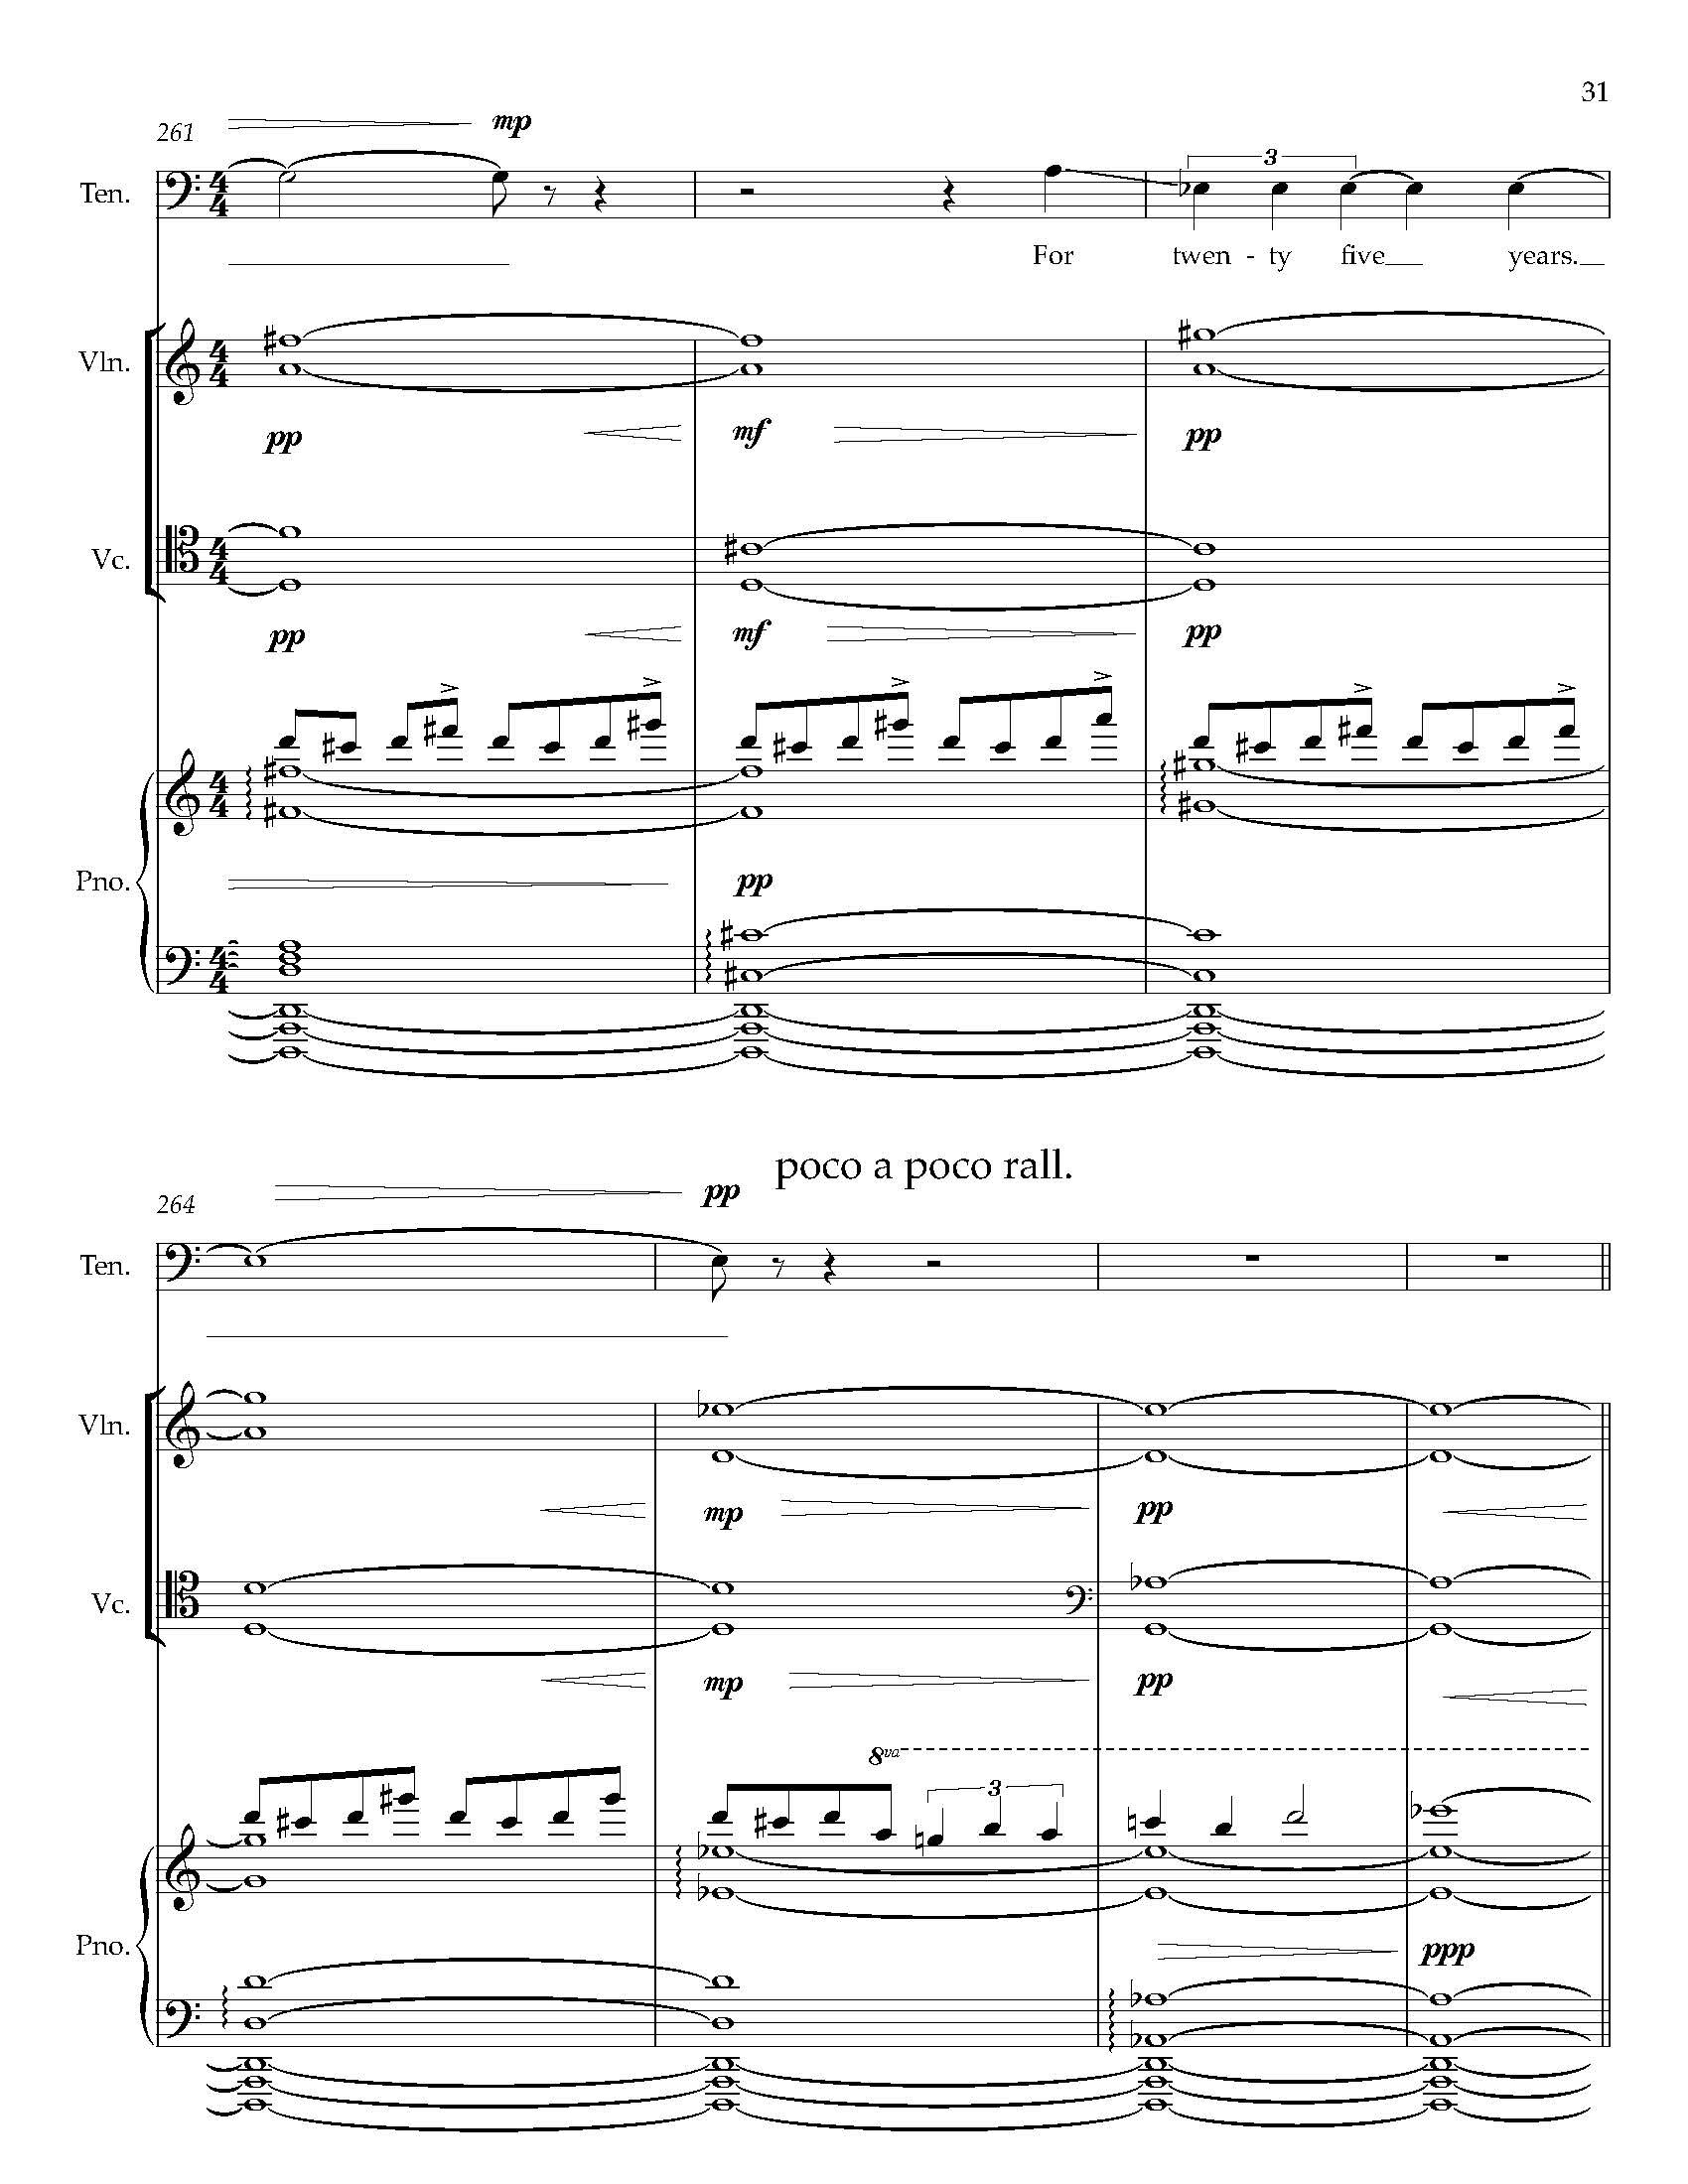 Gursky Songs - Complete Score_Page_39.jpg